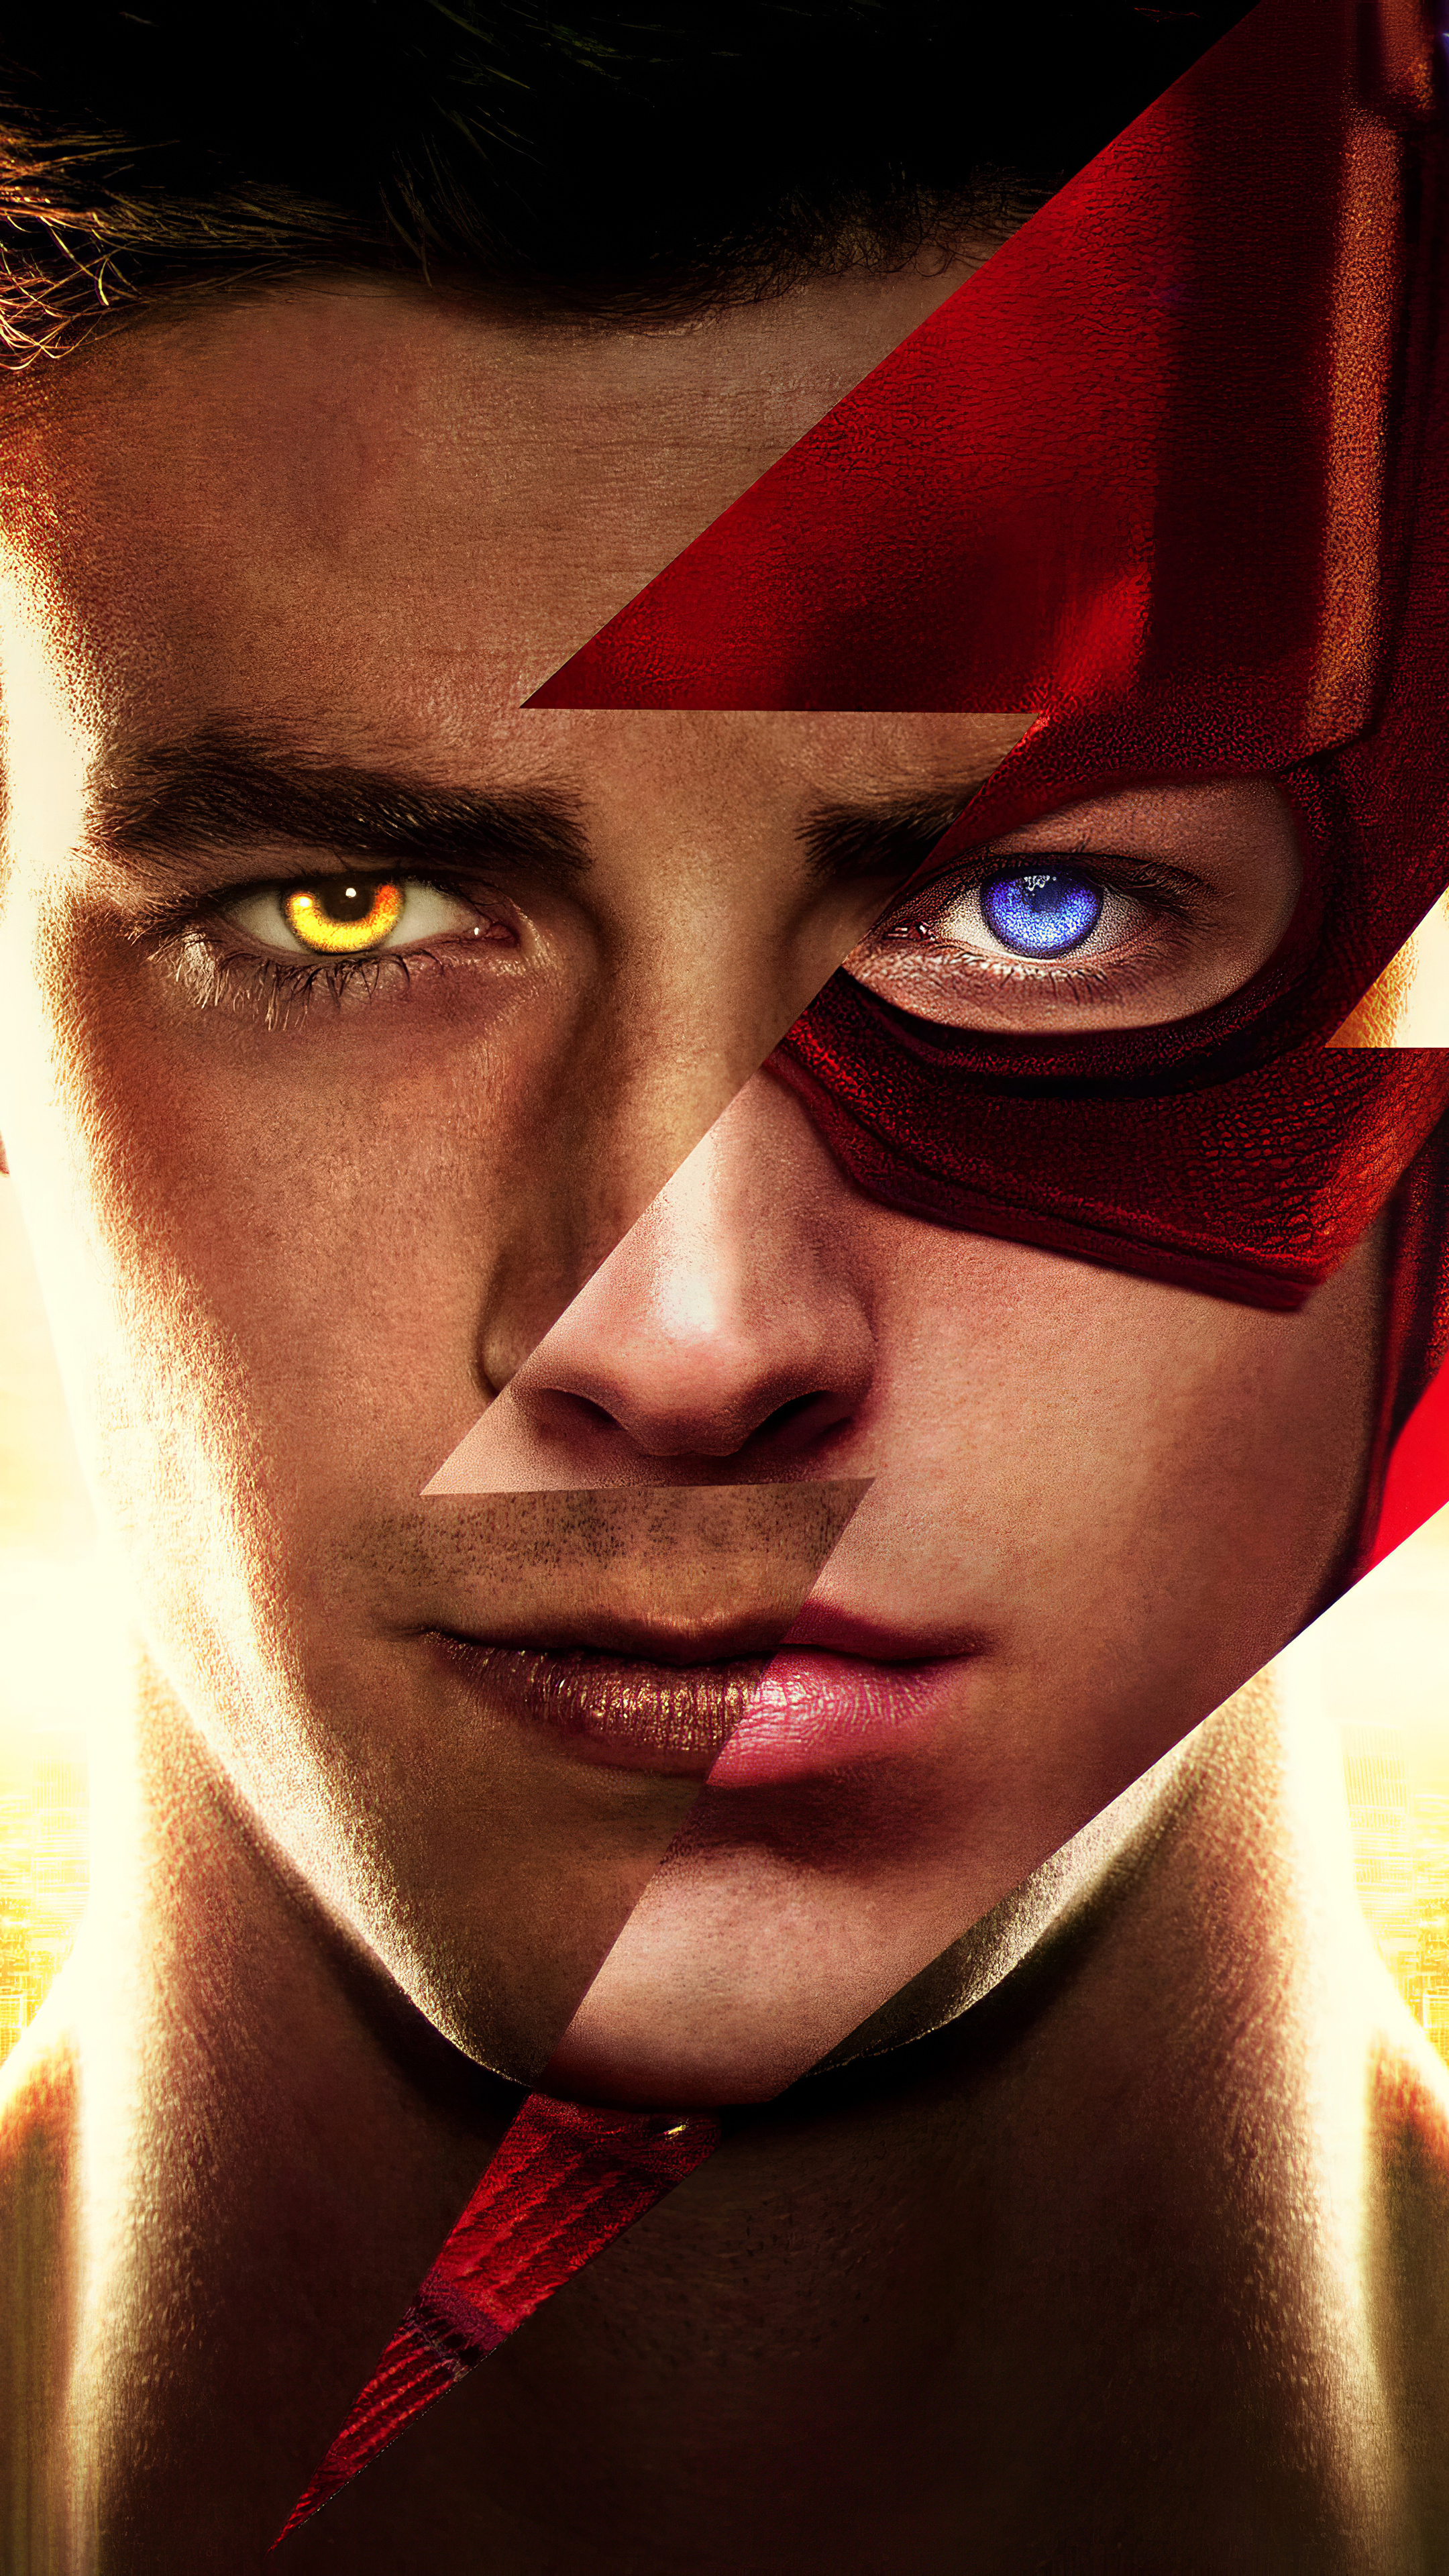 Flash Barry Allen 2020, Sony Xperia wallpapers, HD 4K wallpapers, Small screen superhero, 2160x3840 4K Phone